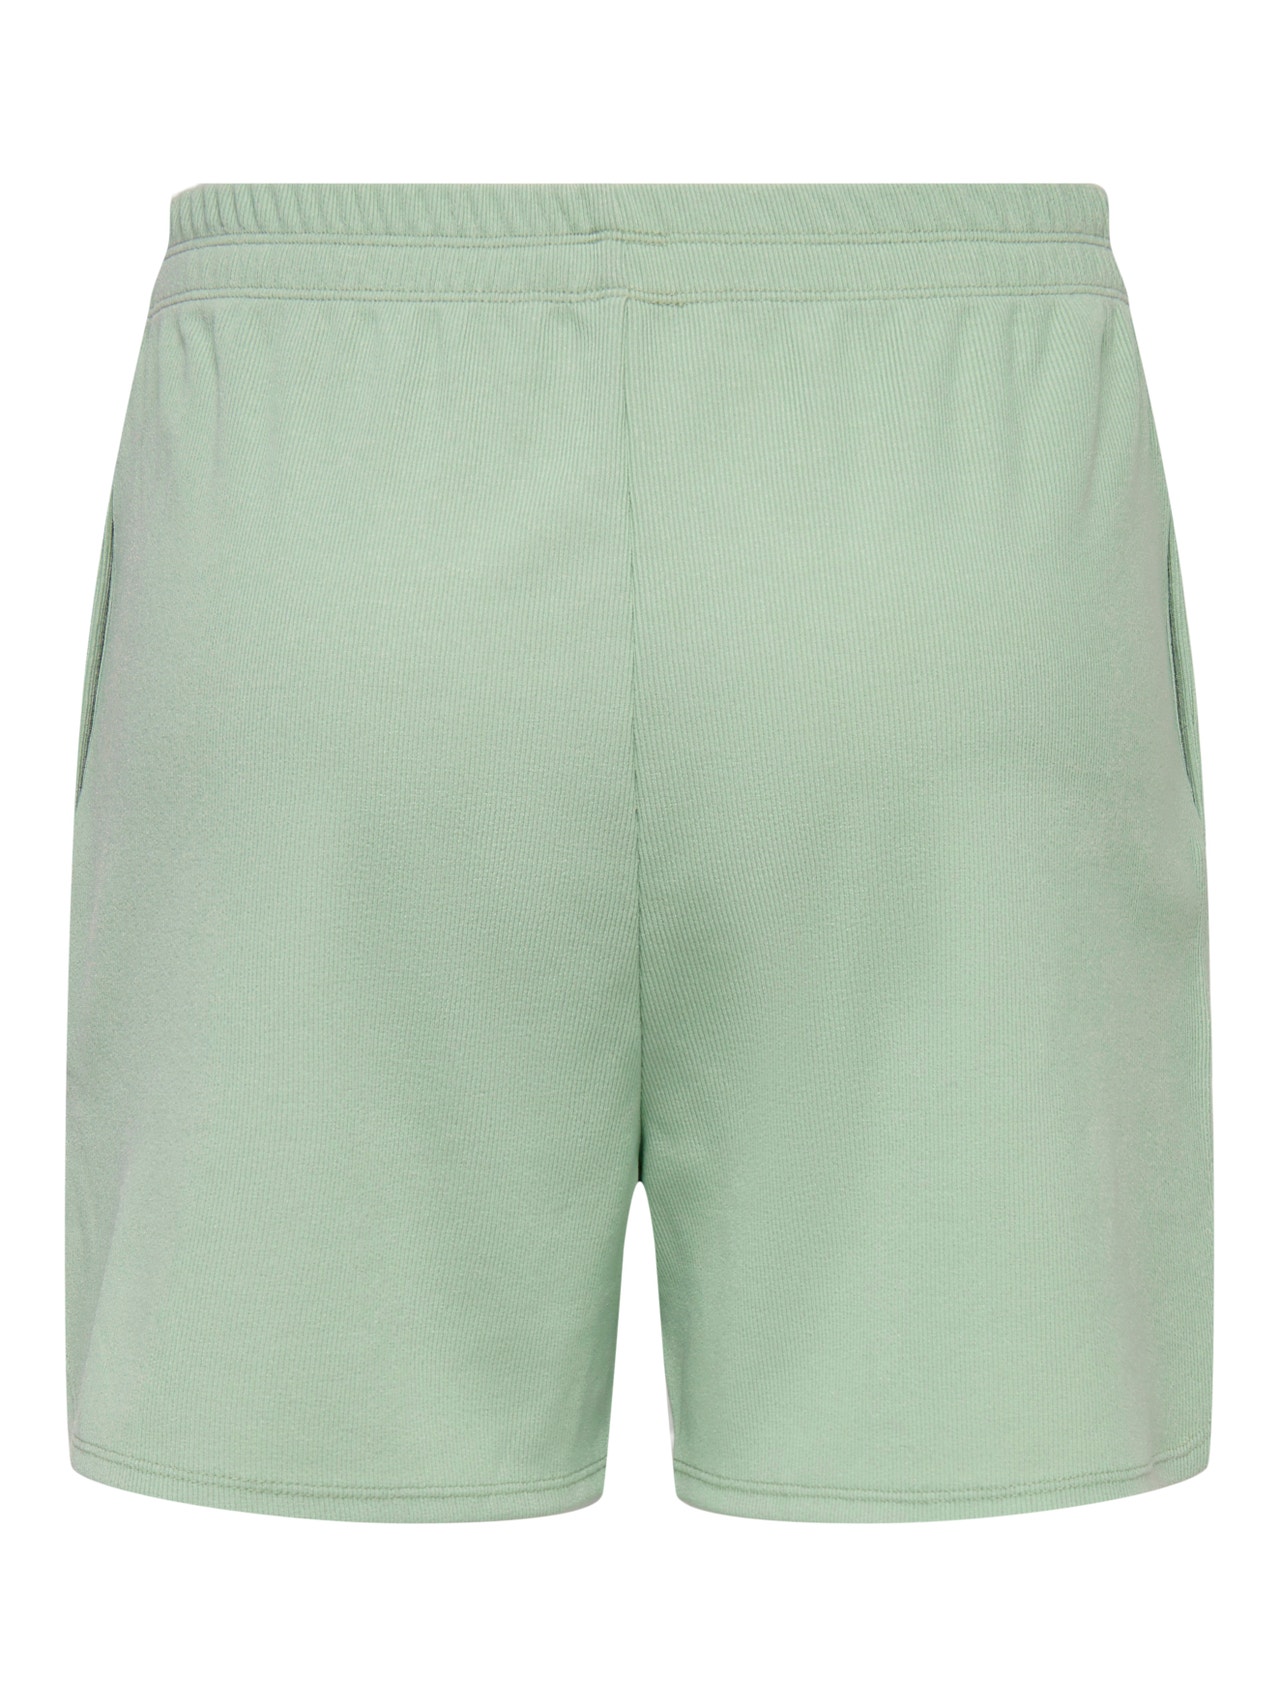 ONLY Training Sweat shorts -Frosty Green - 15244789